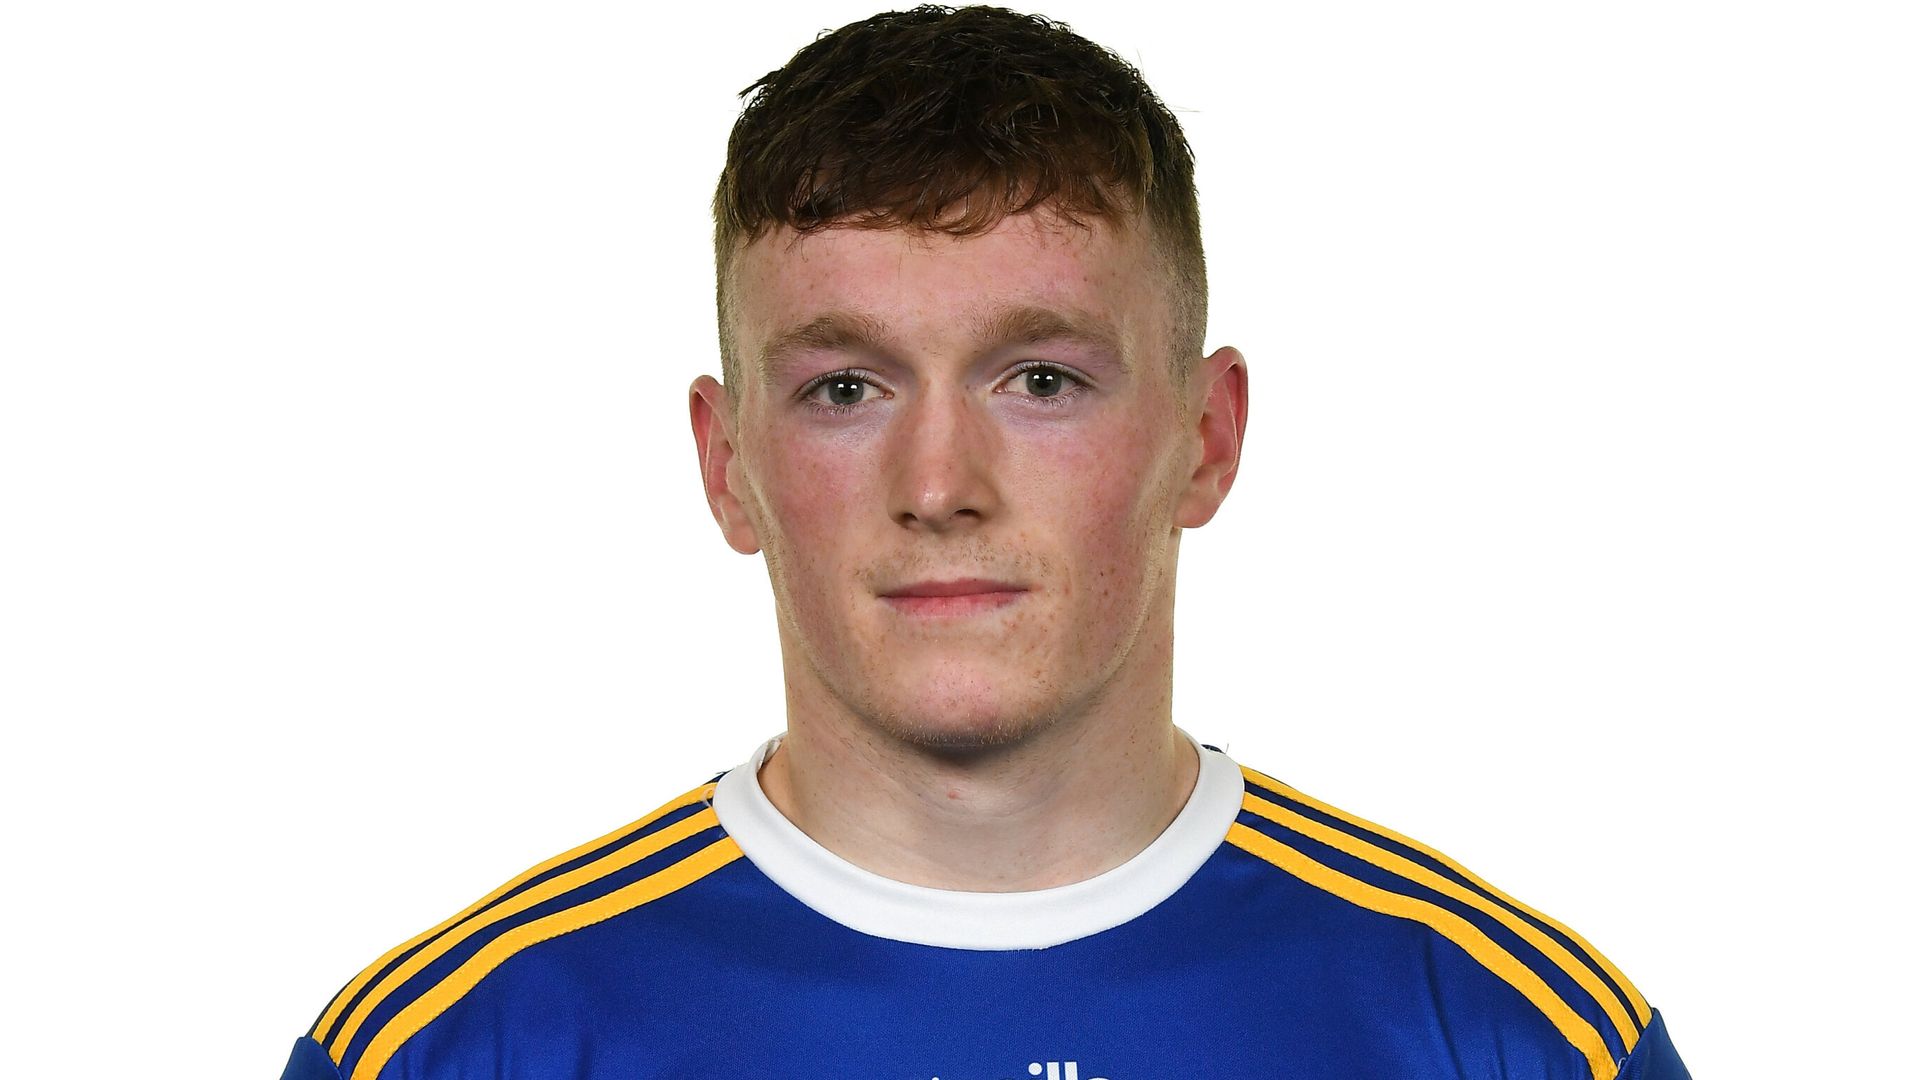 Tipperary hurler Dillon Quirke dies aged 24